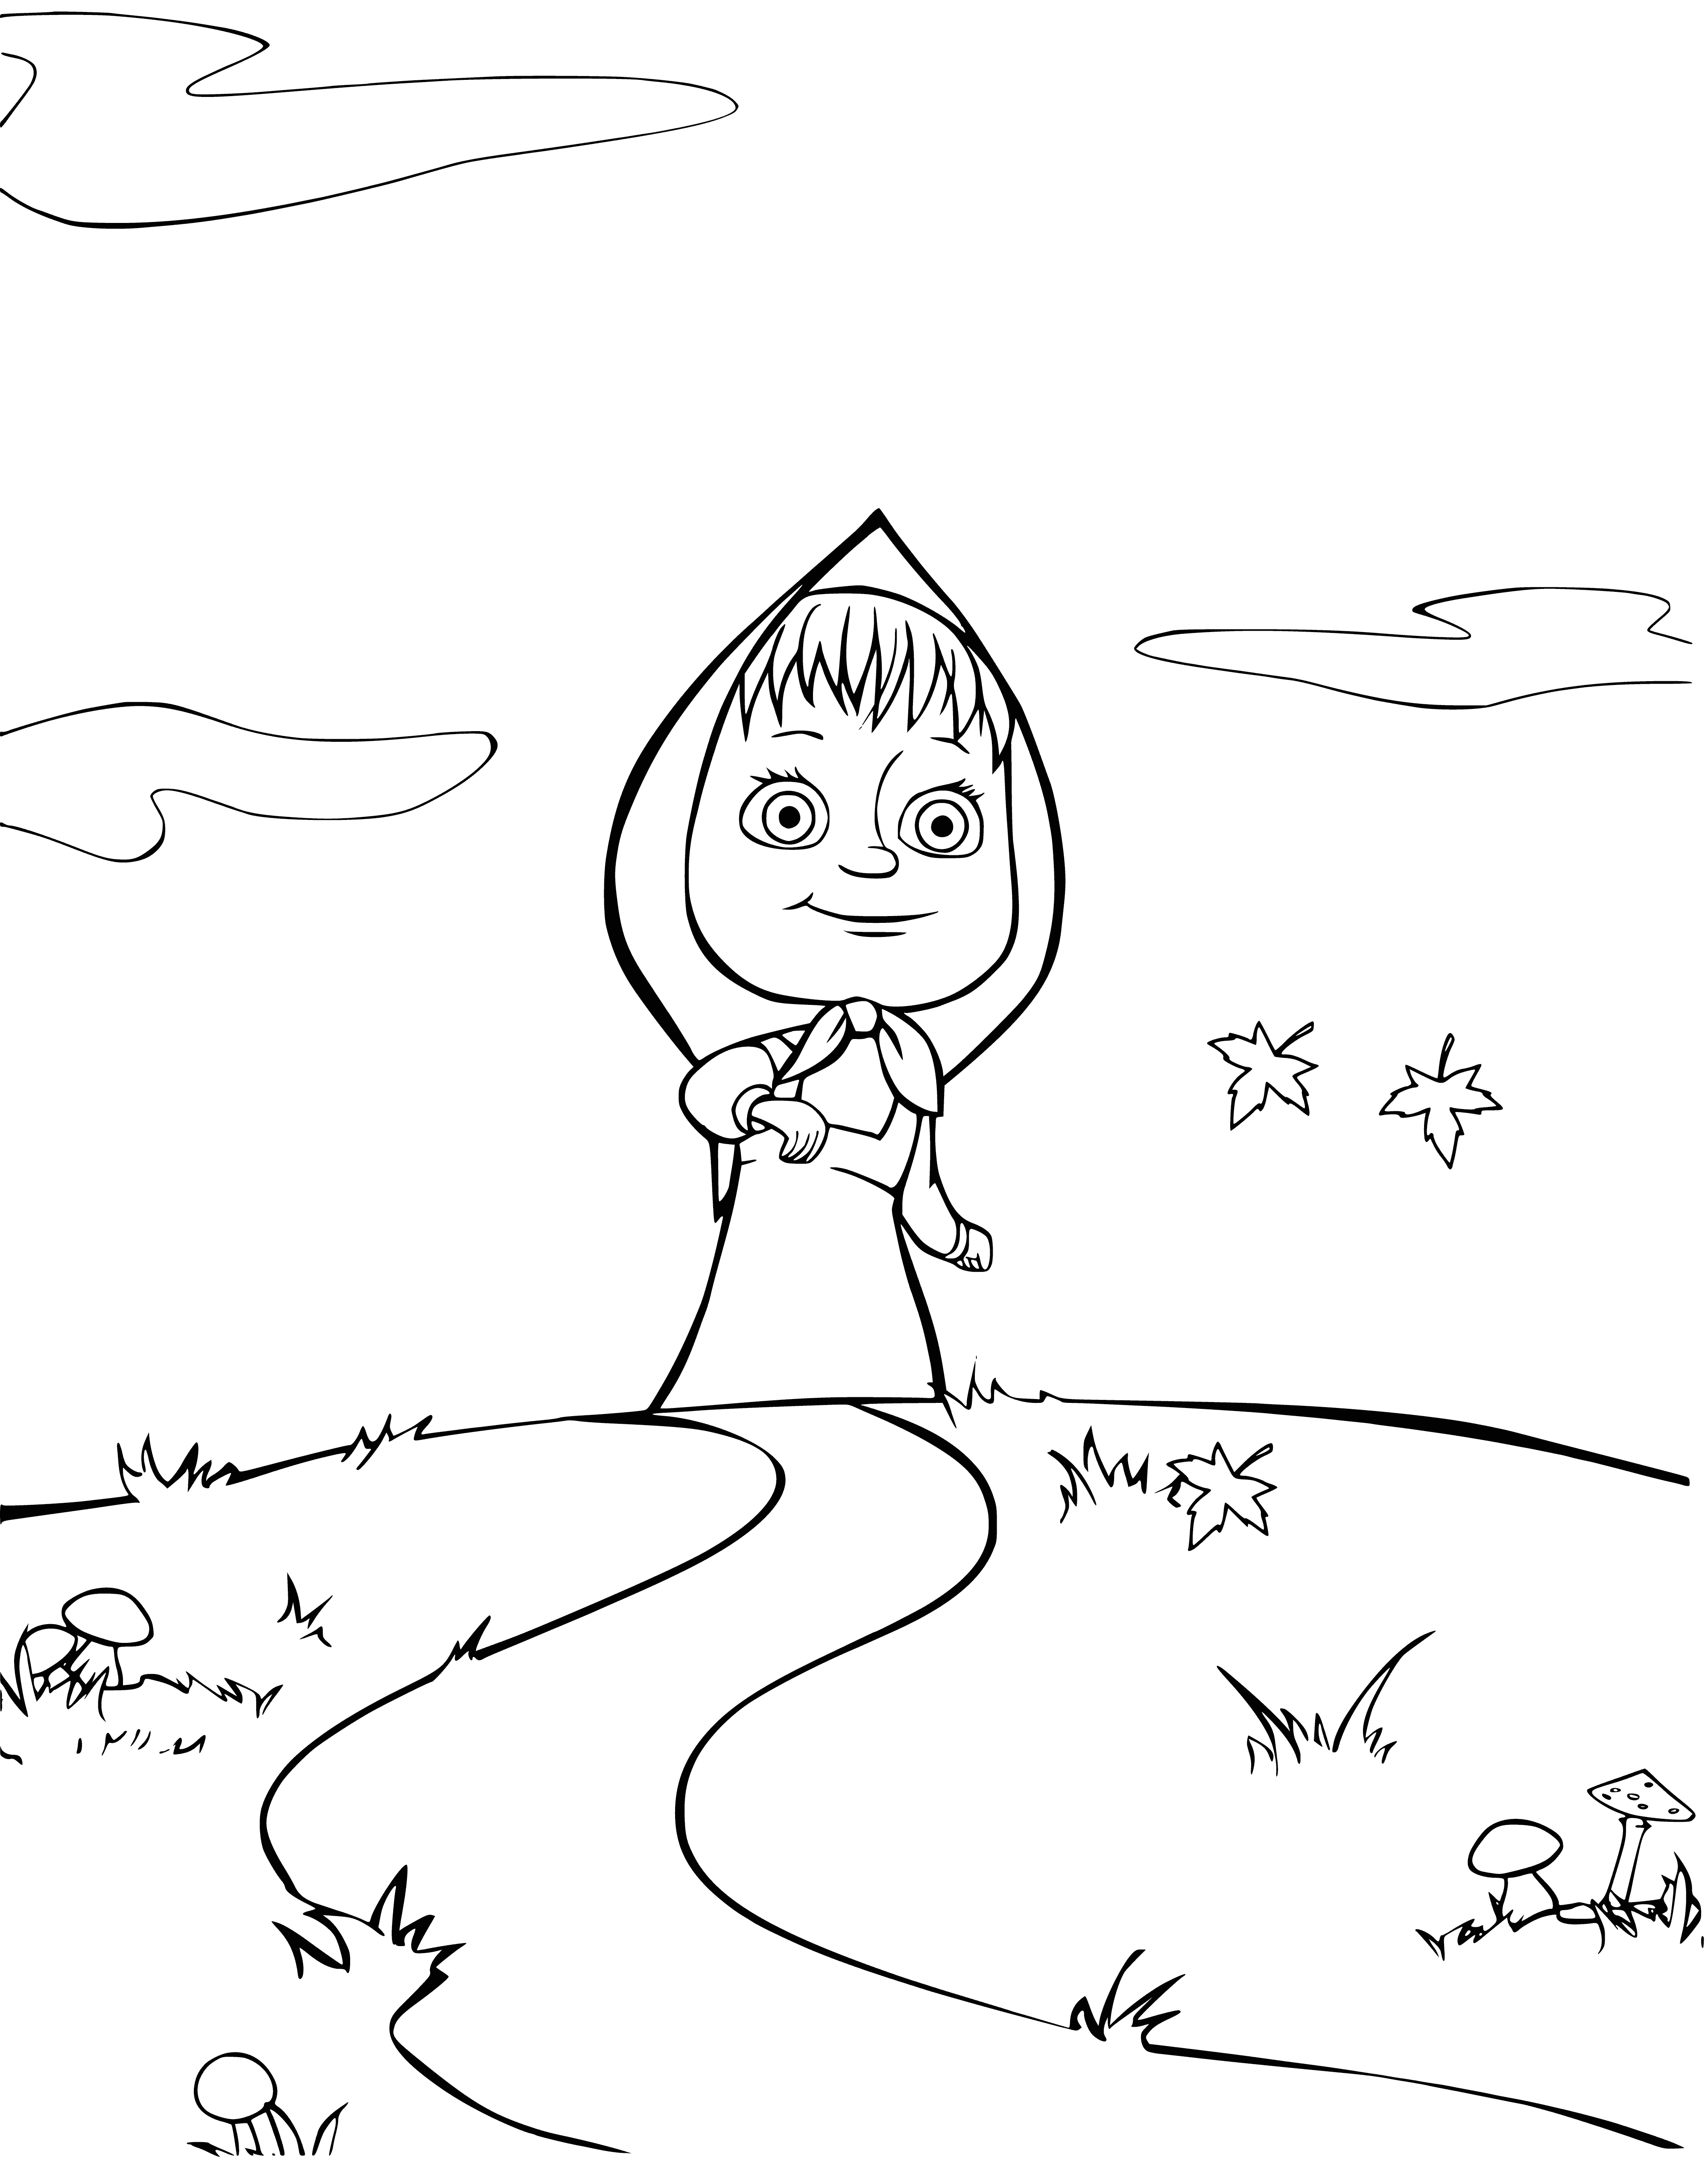 coloring page: Girl in yellow coat & red hat looking at something in distance on hillock with trees & blue sky.